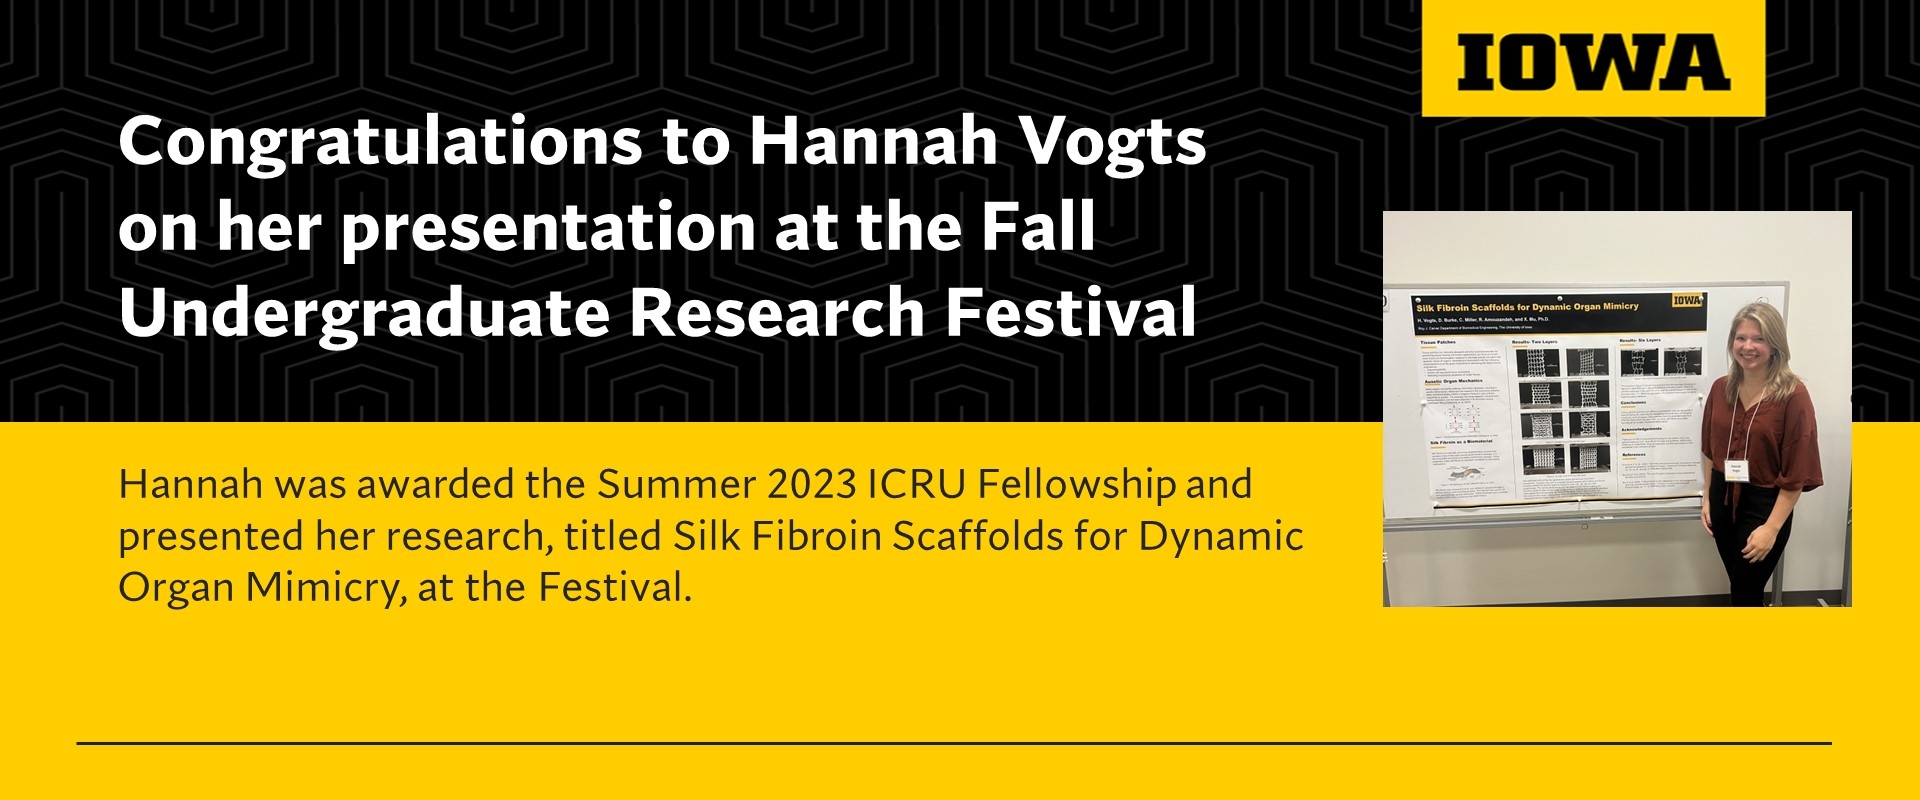 Celebration of Hannah Vogts, awarded the ICRU Fellowship who presented her research at the Fall Undergrad Research Festival